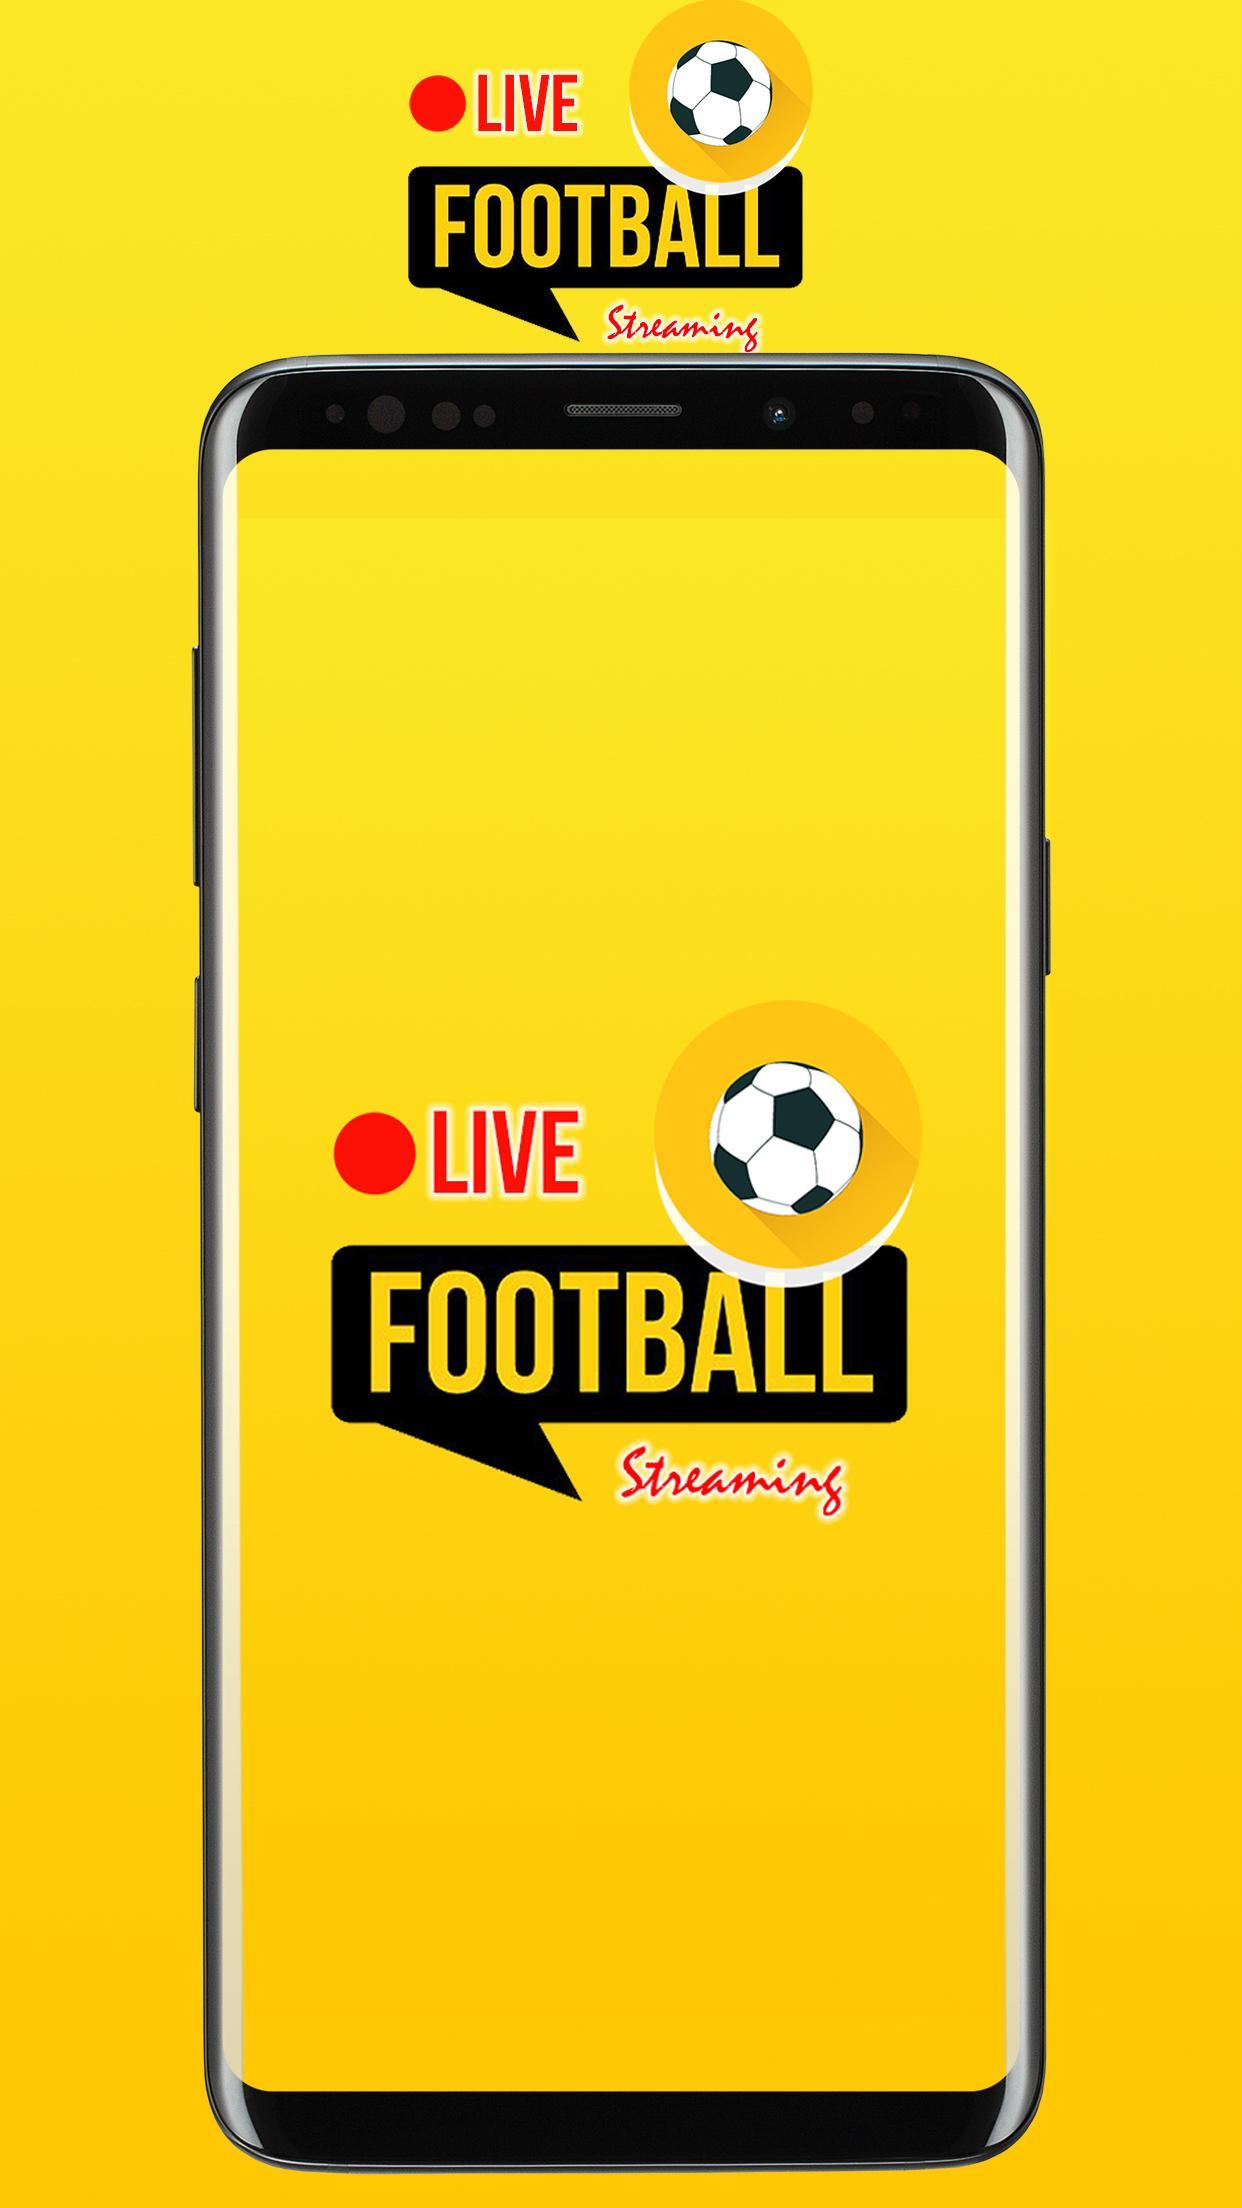 Live Football Tv Streaming for Android - APK Download